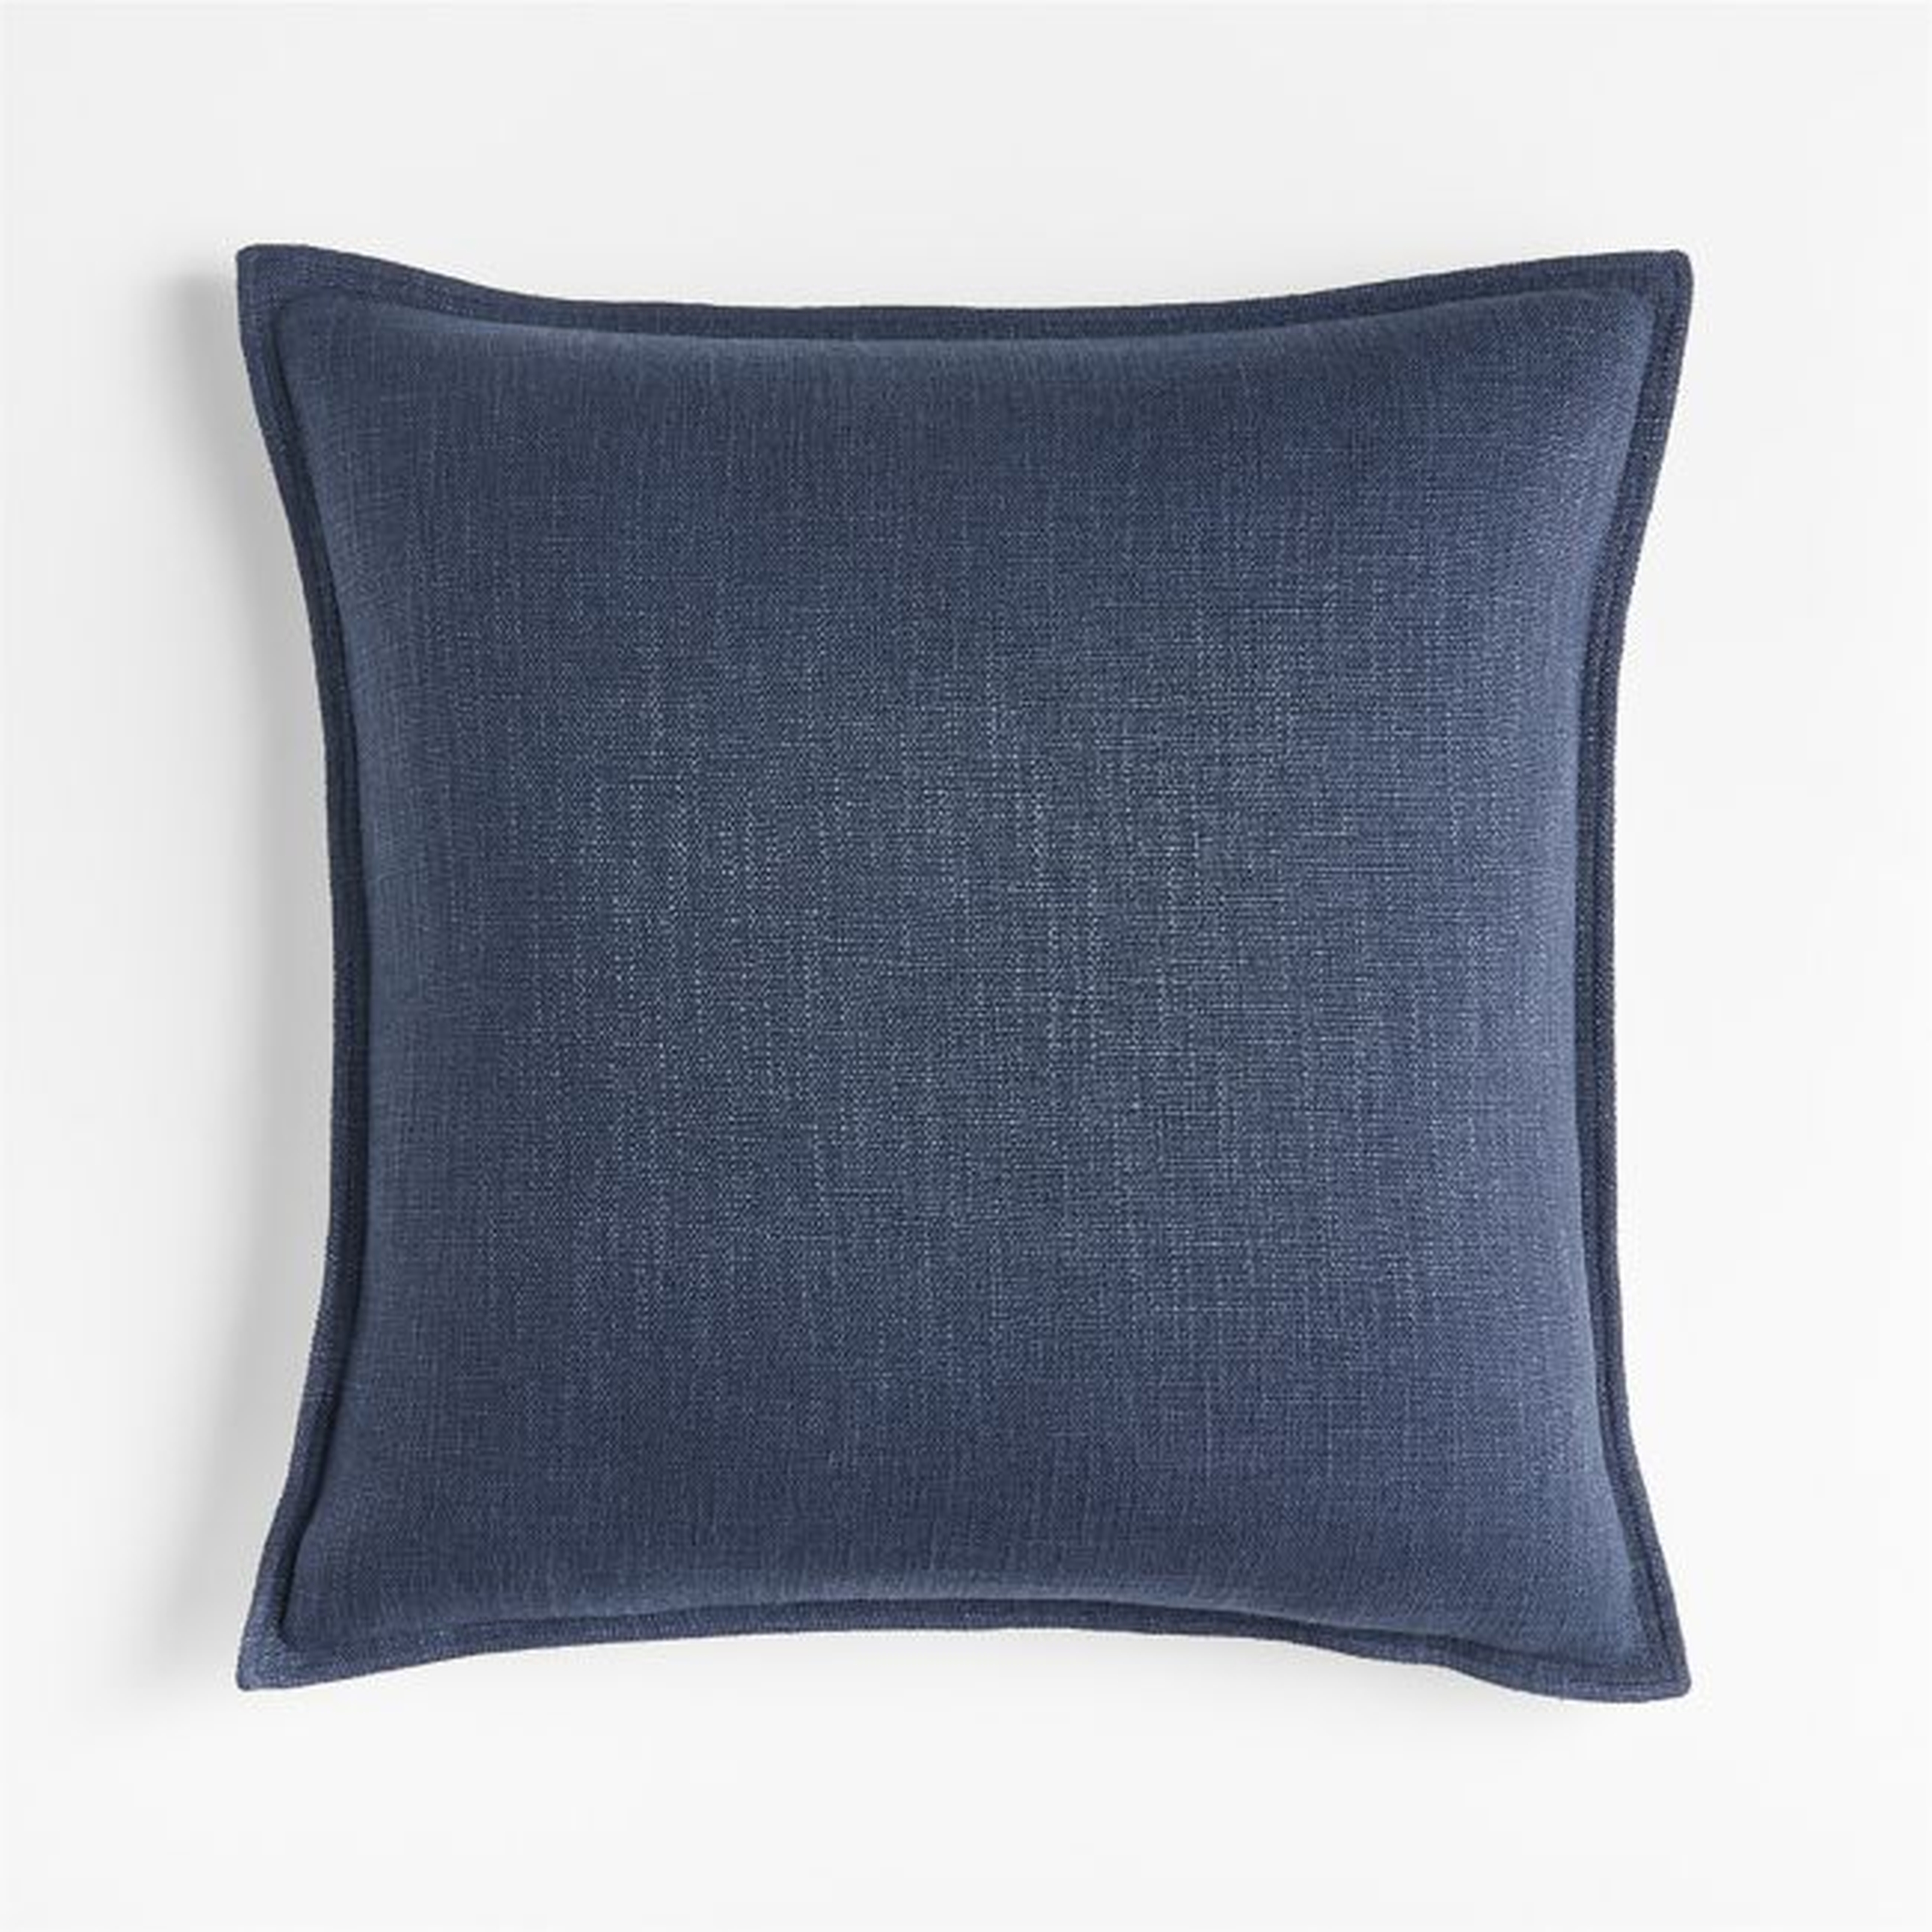 Indigo 20"x20" Laundered Linen Throw Pillow with Feather Insert - Crate and Barrel